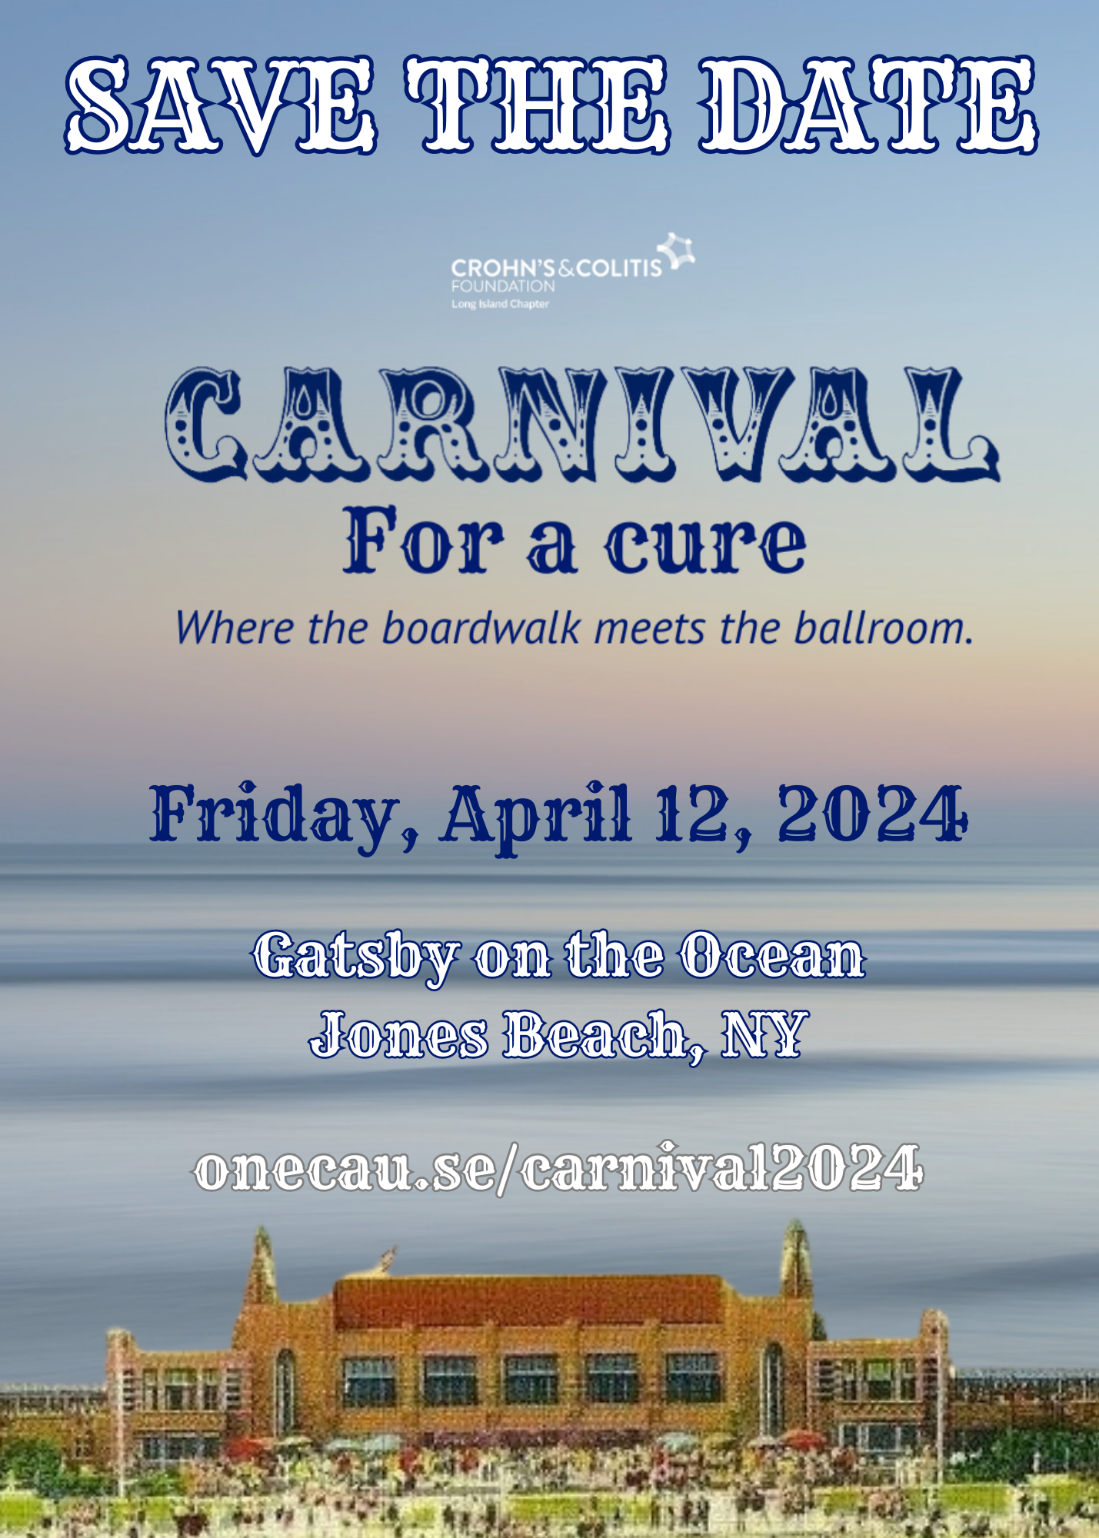 Carnival for a Cure, April 12, 2024